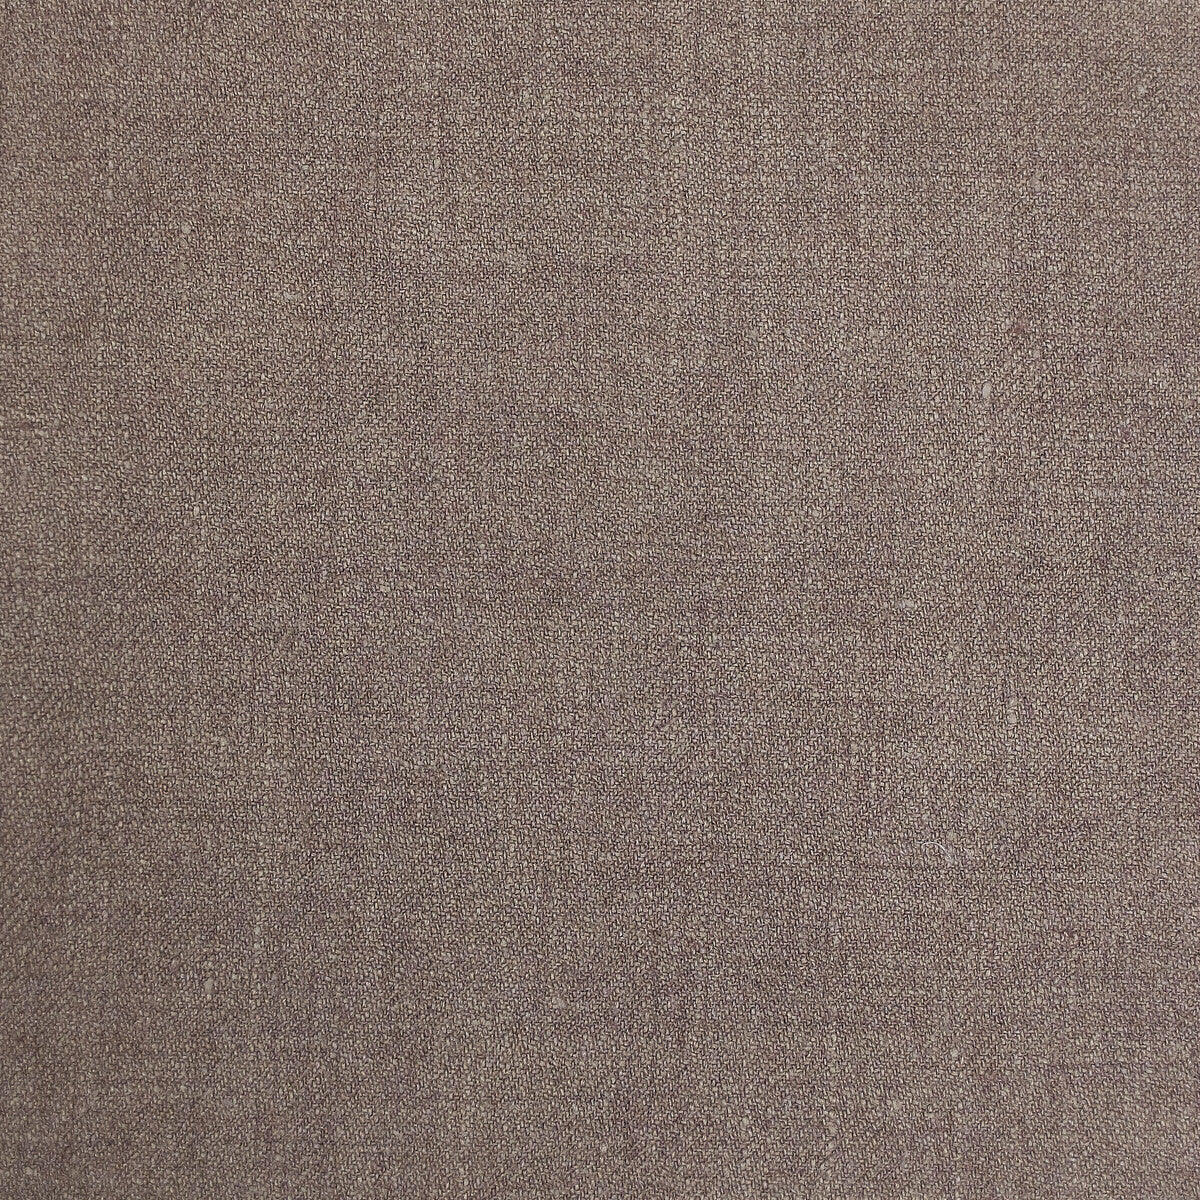 Albert fabric in 1 color - pattern LZ-30335.01.0 - by Kravet Design in the Lizzo collection